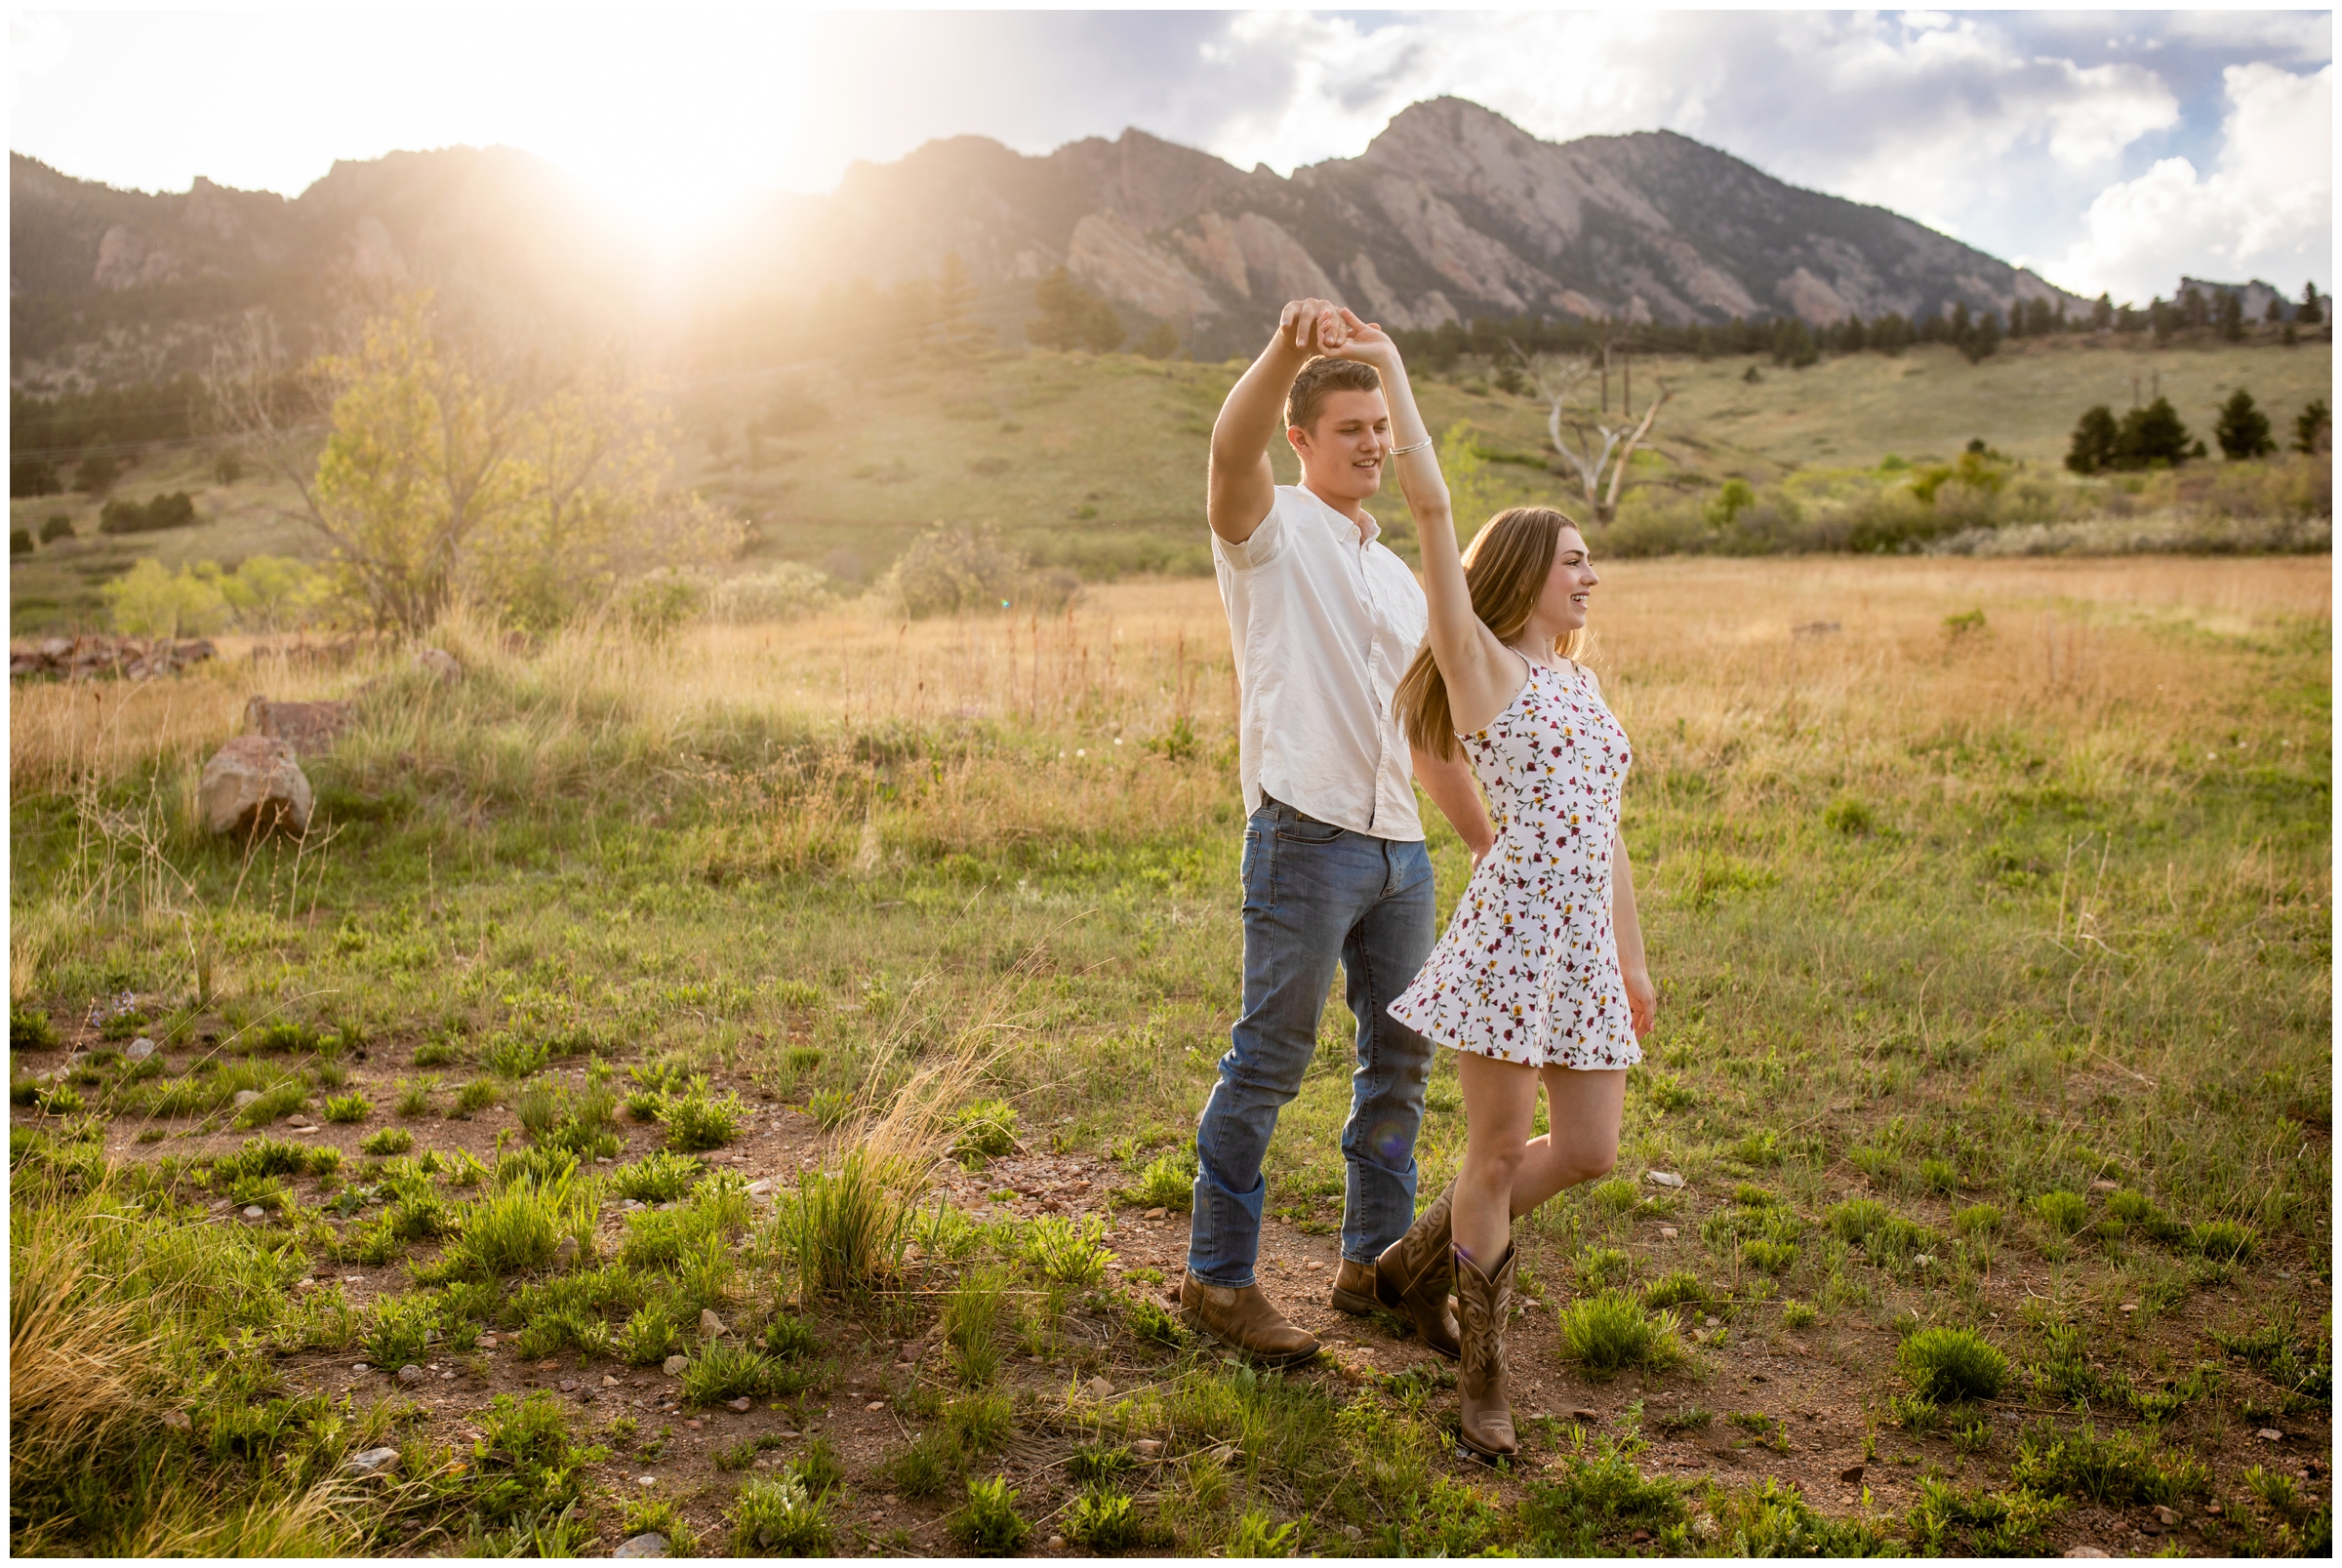 couple dancing in a field with mountains in background during Colorado engagement photography session at South Mesa trail